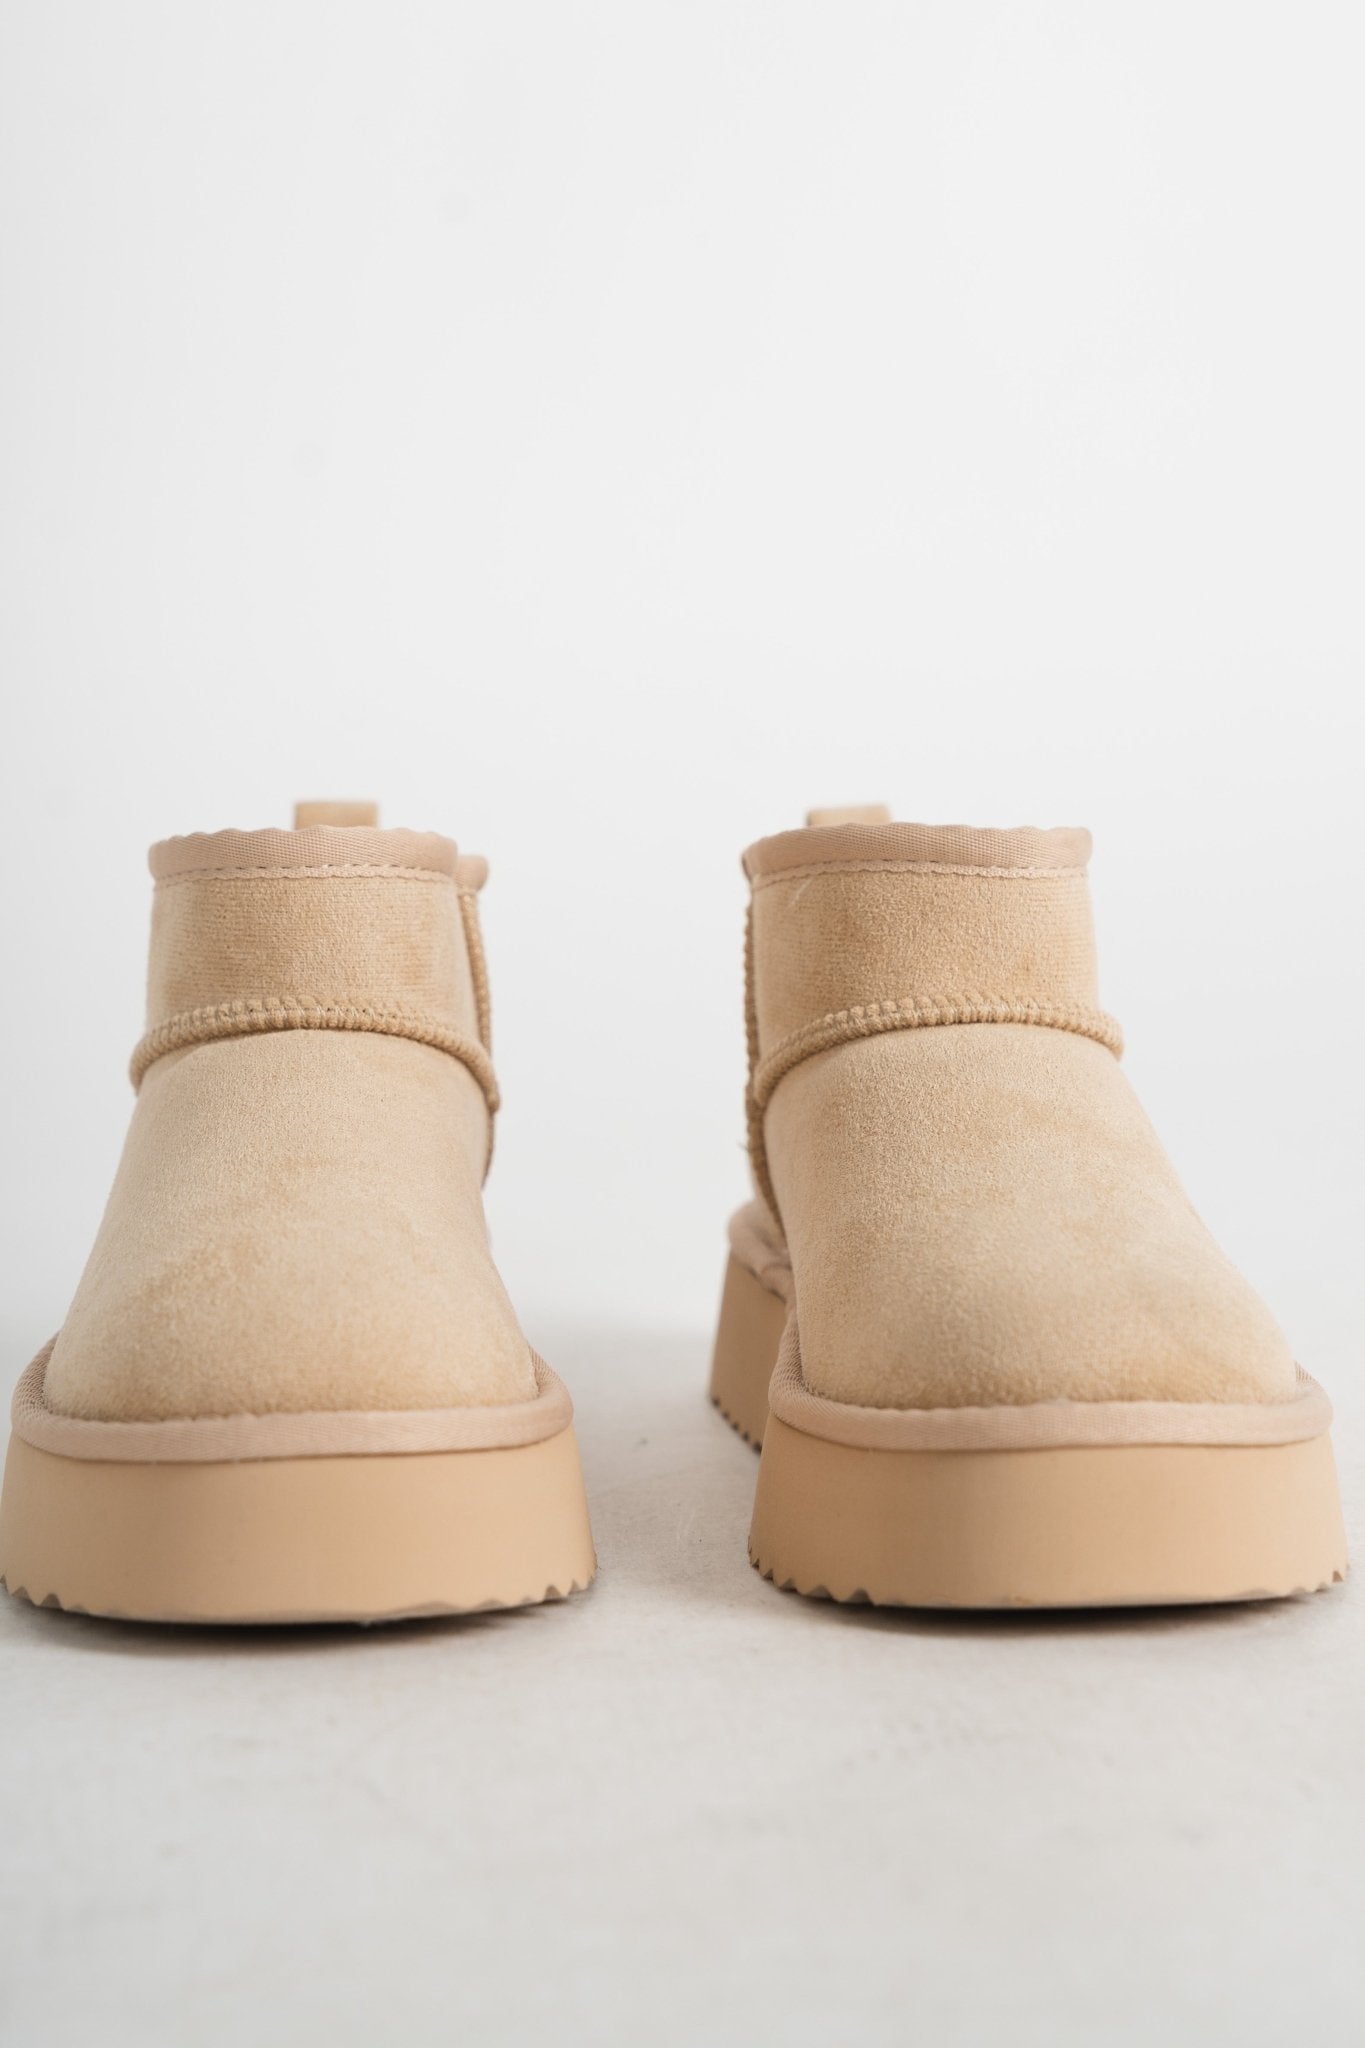 Breckenridge low top slipper boot natural - Trendy shoes - Fashion Shoes at Lush Fashion Lounge Boutique in Oklahoma City